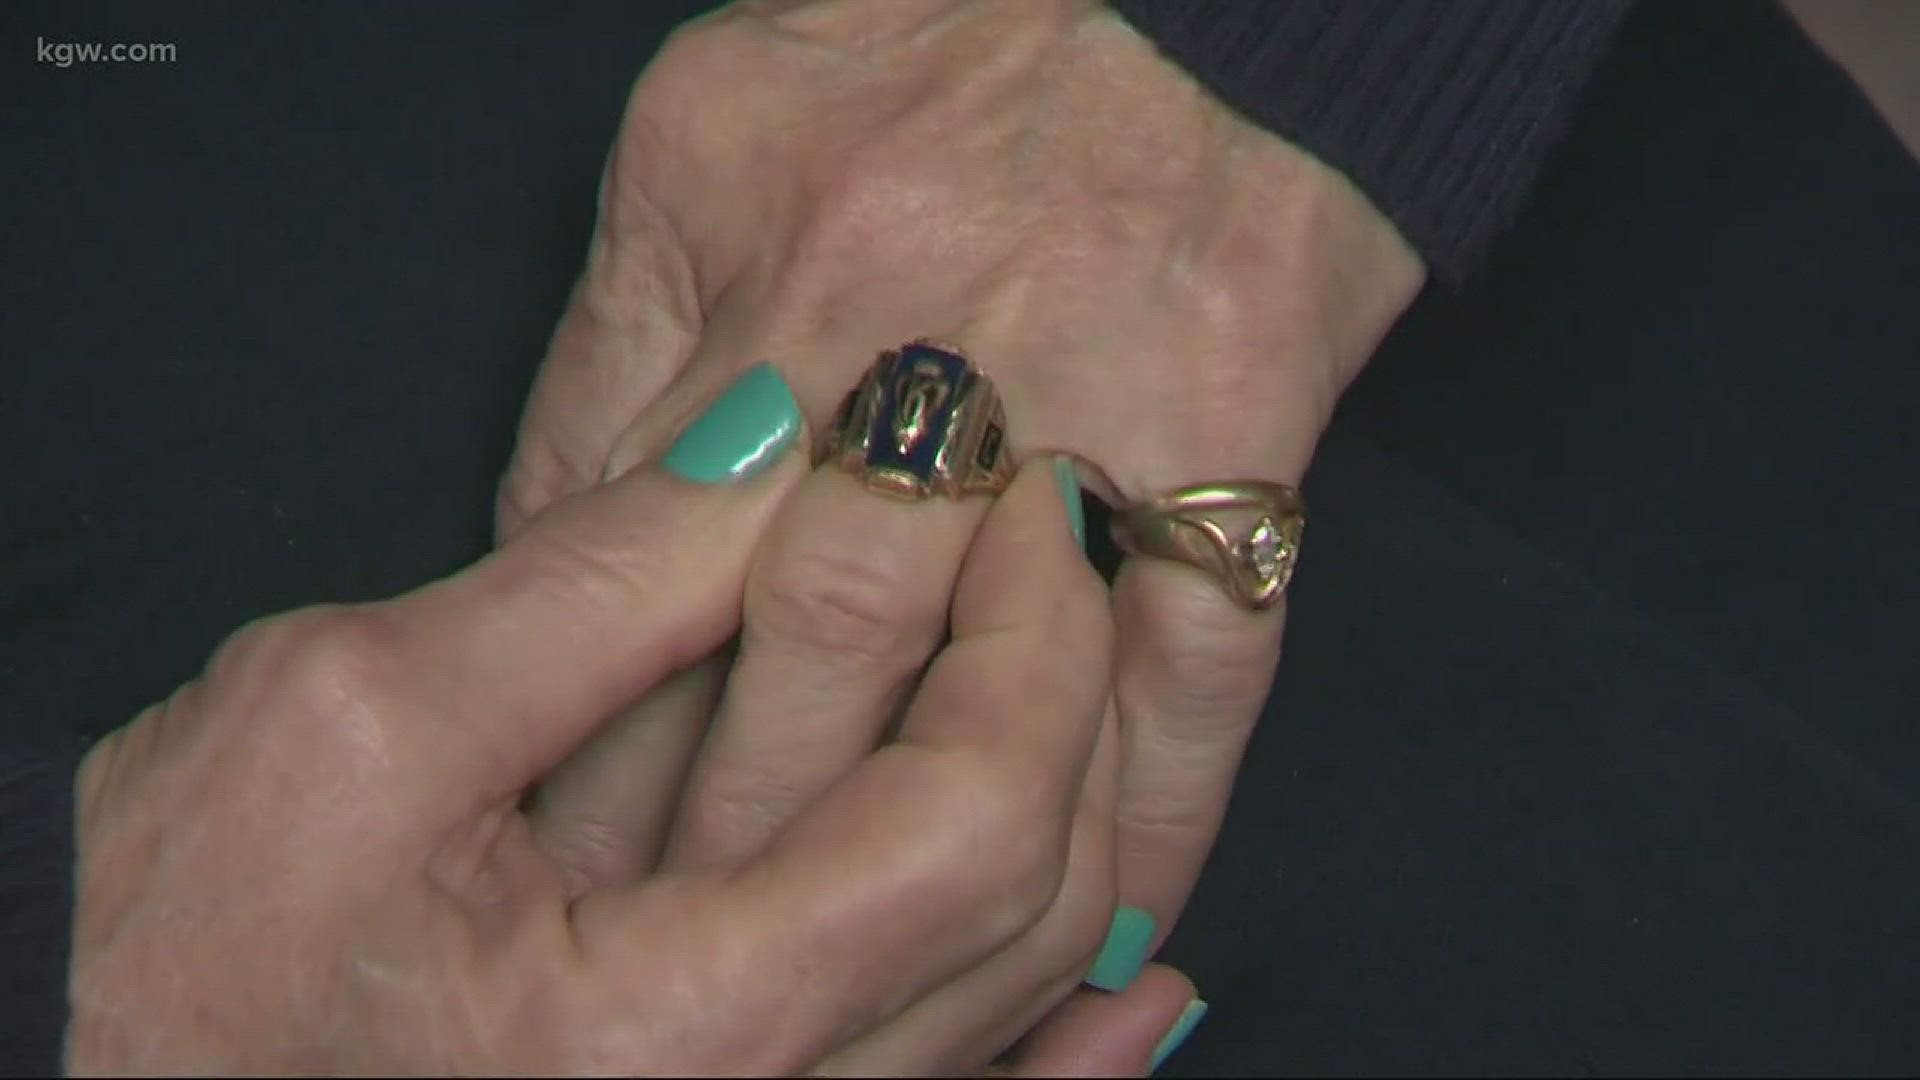 A high school class ring that was stolen and vanished for 20 years, was returned to the overjoyed owner.